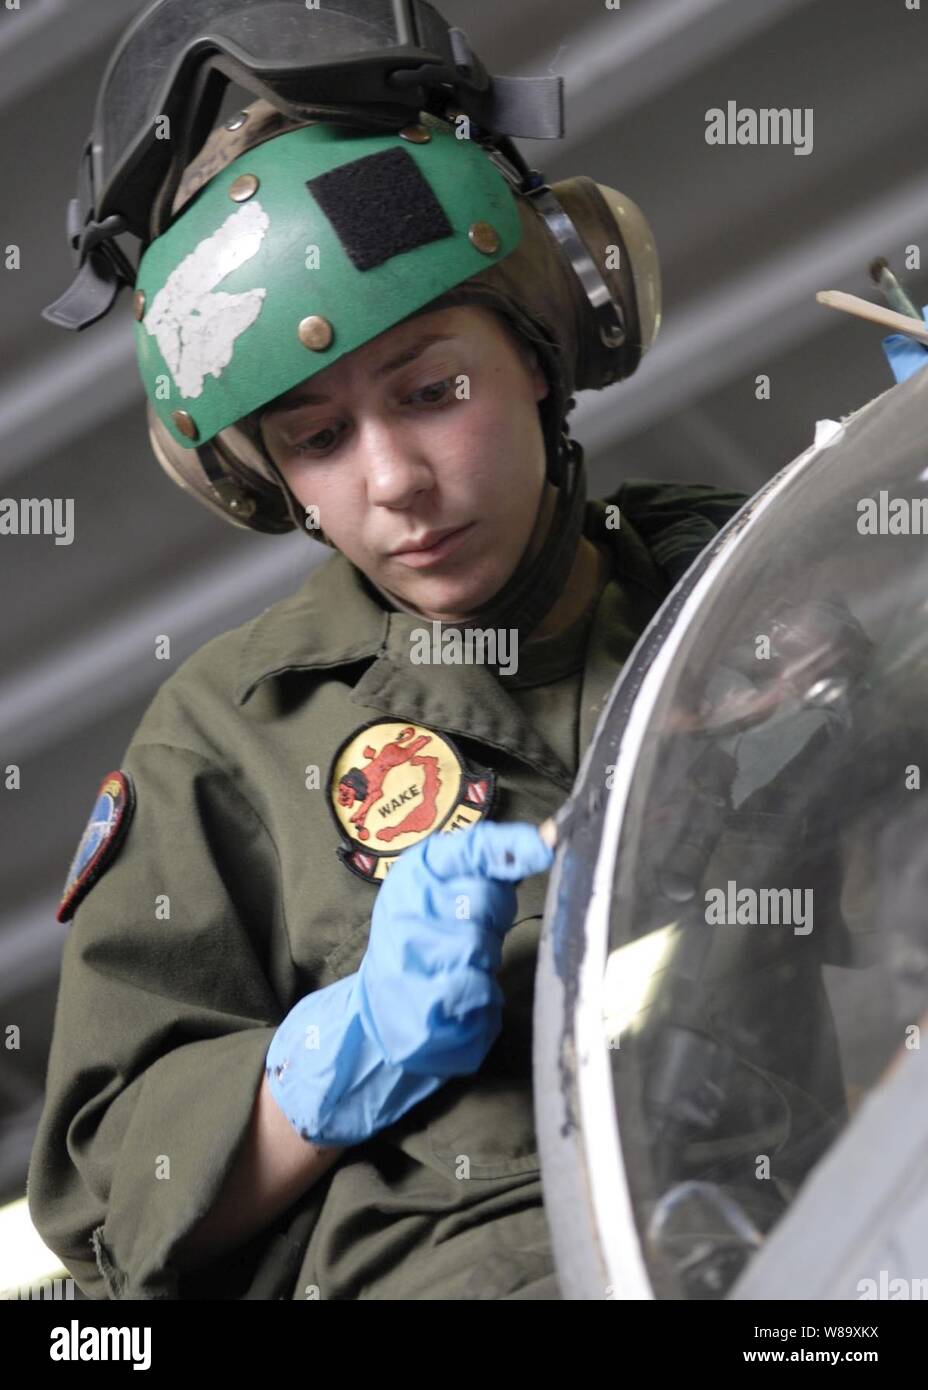 U.S. Marine Corps Cpl. Miranda Bouska, with Fixed Wing Marine Attack Squadron 211, and deployed to the amphibious assault ship USS Essex (LHD 2), applies sealant on the cockpit of a AV-8B Harrier aircraft in the ship's hanger bay while the ship is underway in the Coral Sea on July 11, 2009.  The Essex is the lead ship of the only forward-deployed expeditionary strike group and serves as the flagship for Combined Task Force 76, the Navy's only forward-deployed amphibious force command. Stock Photo